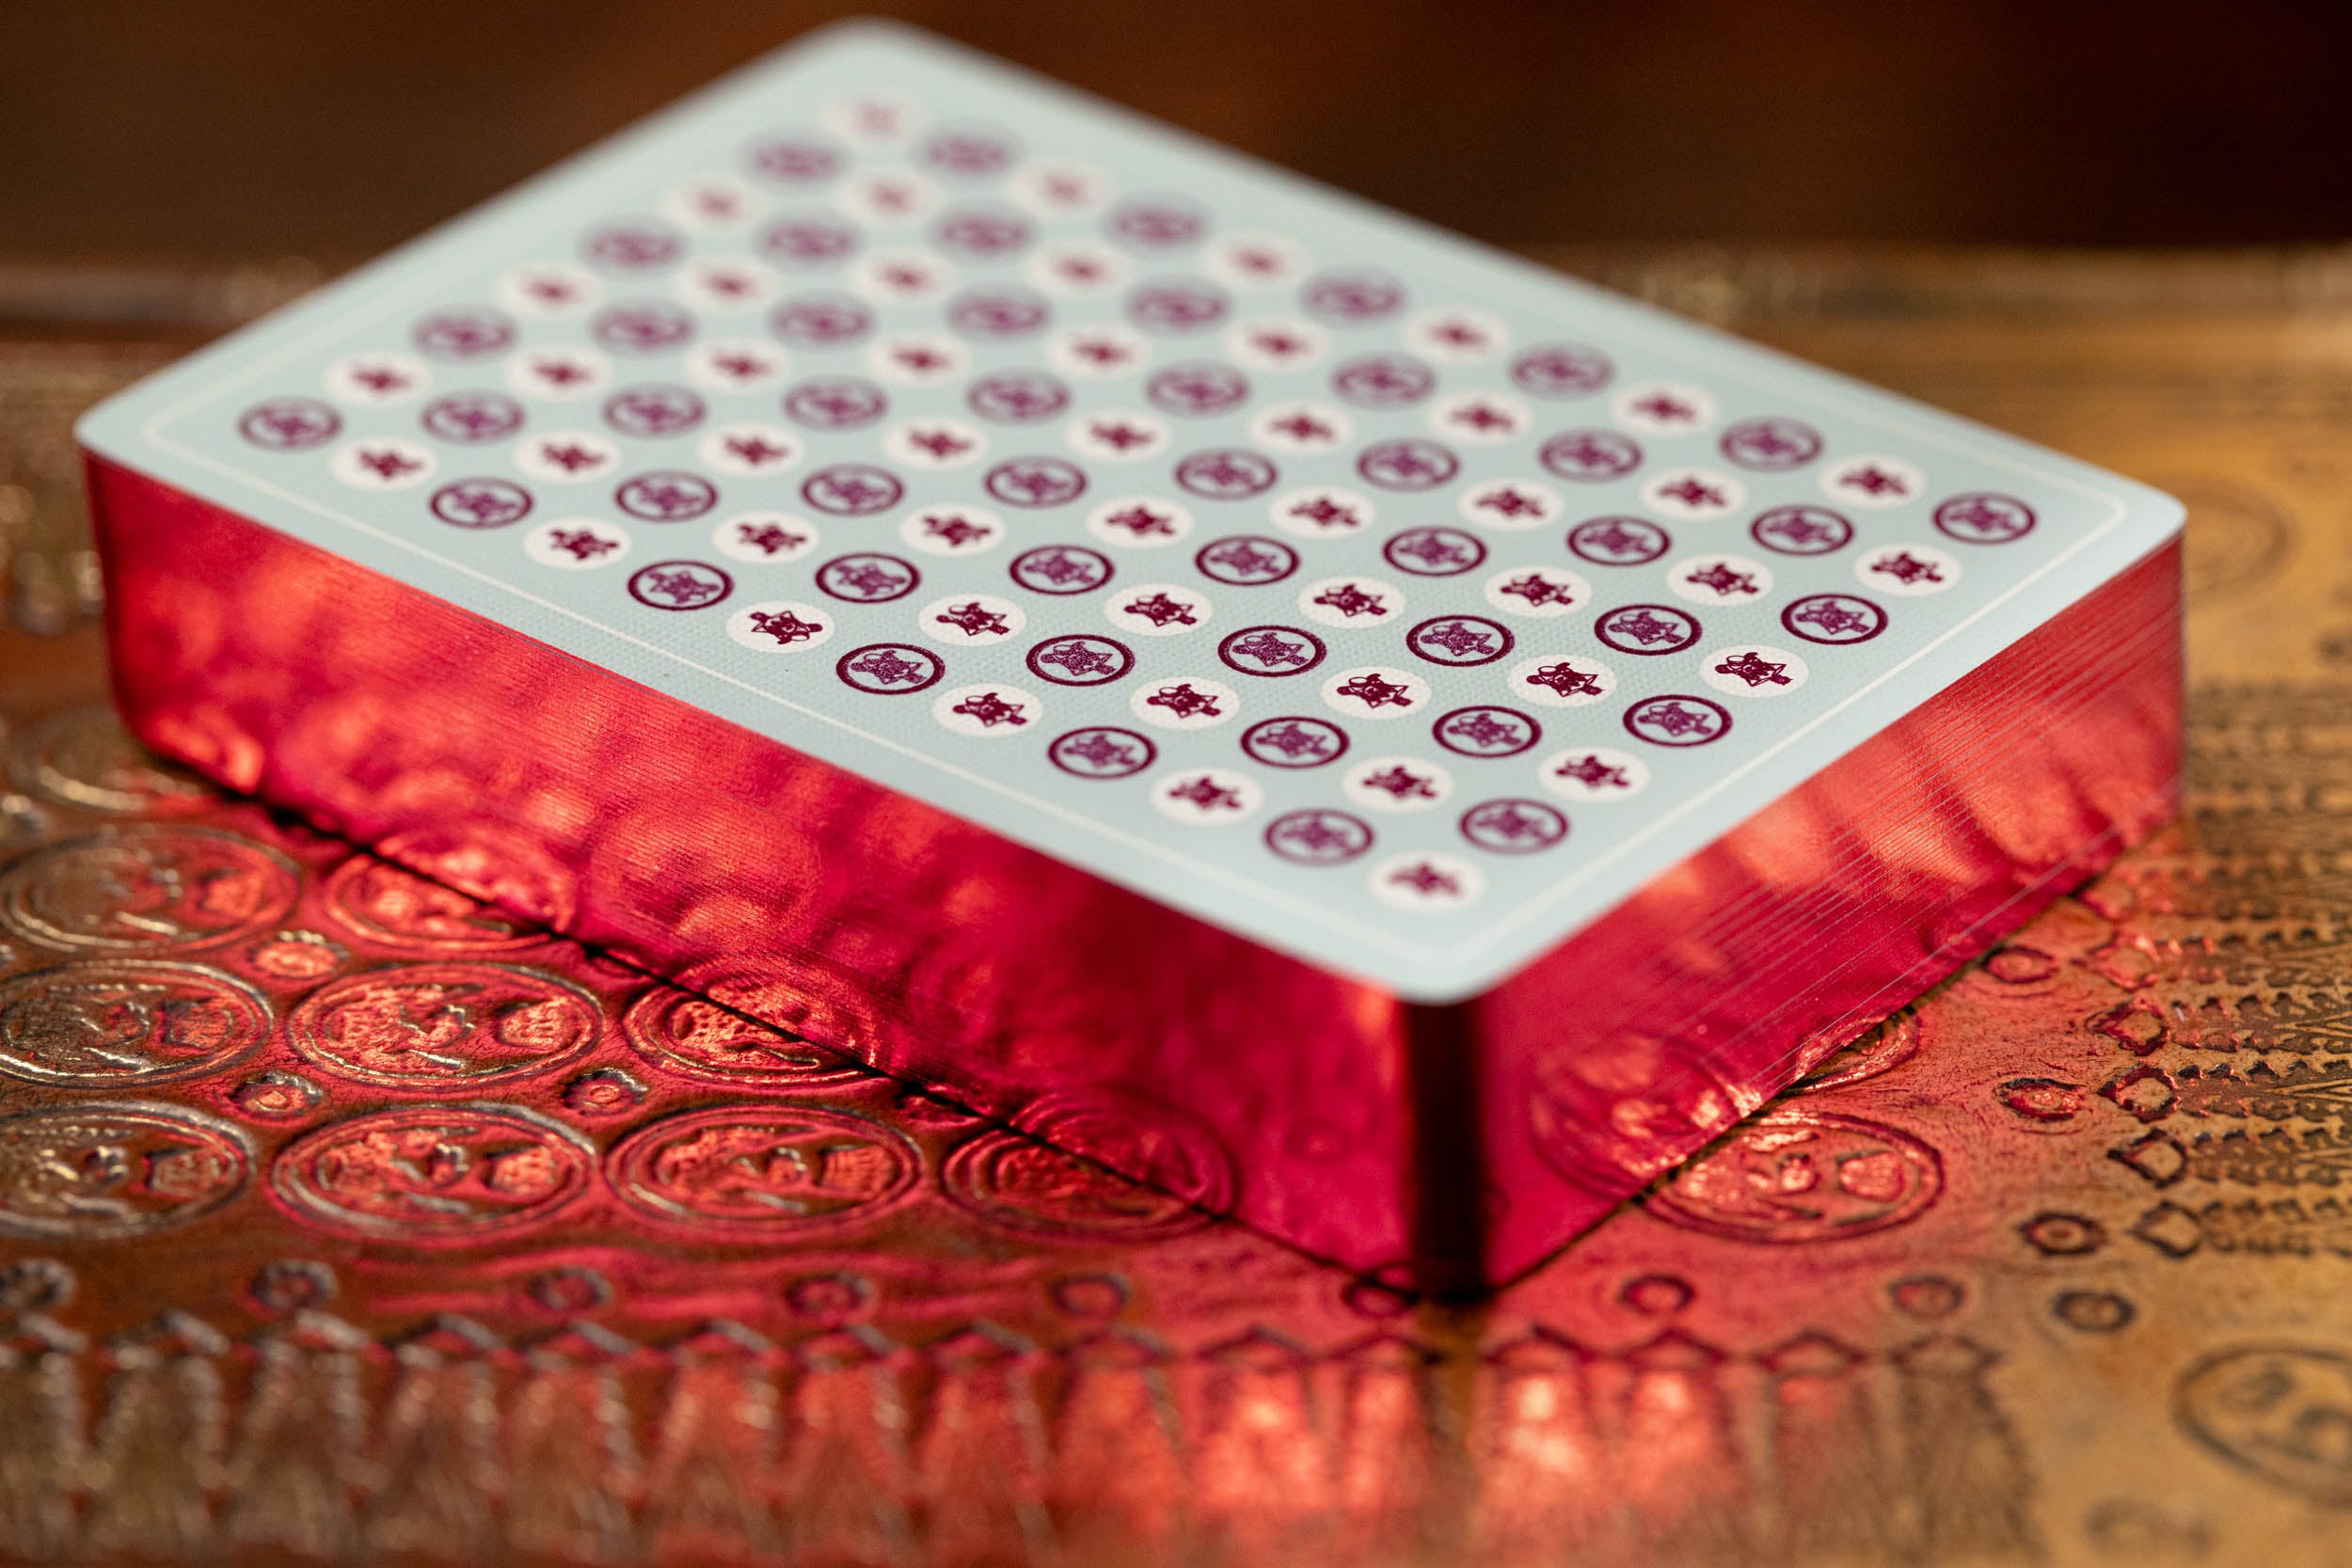 Table Players Vol. 17 Luxury Playing Cards